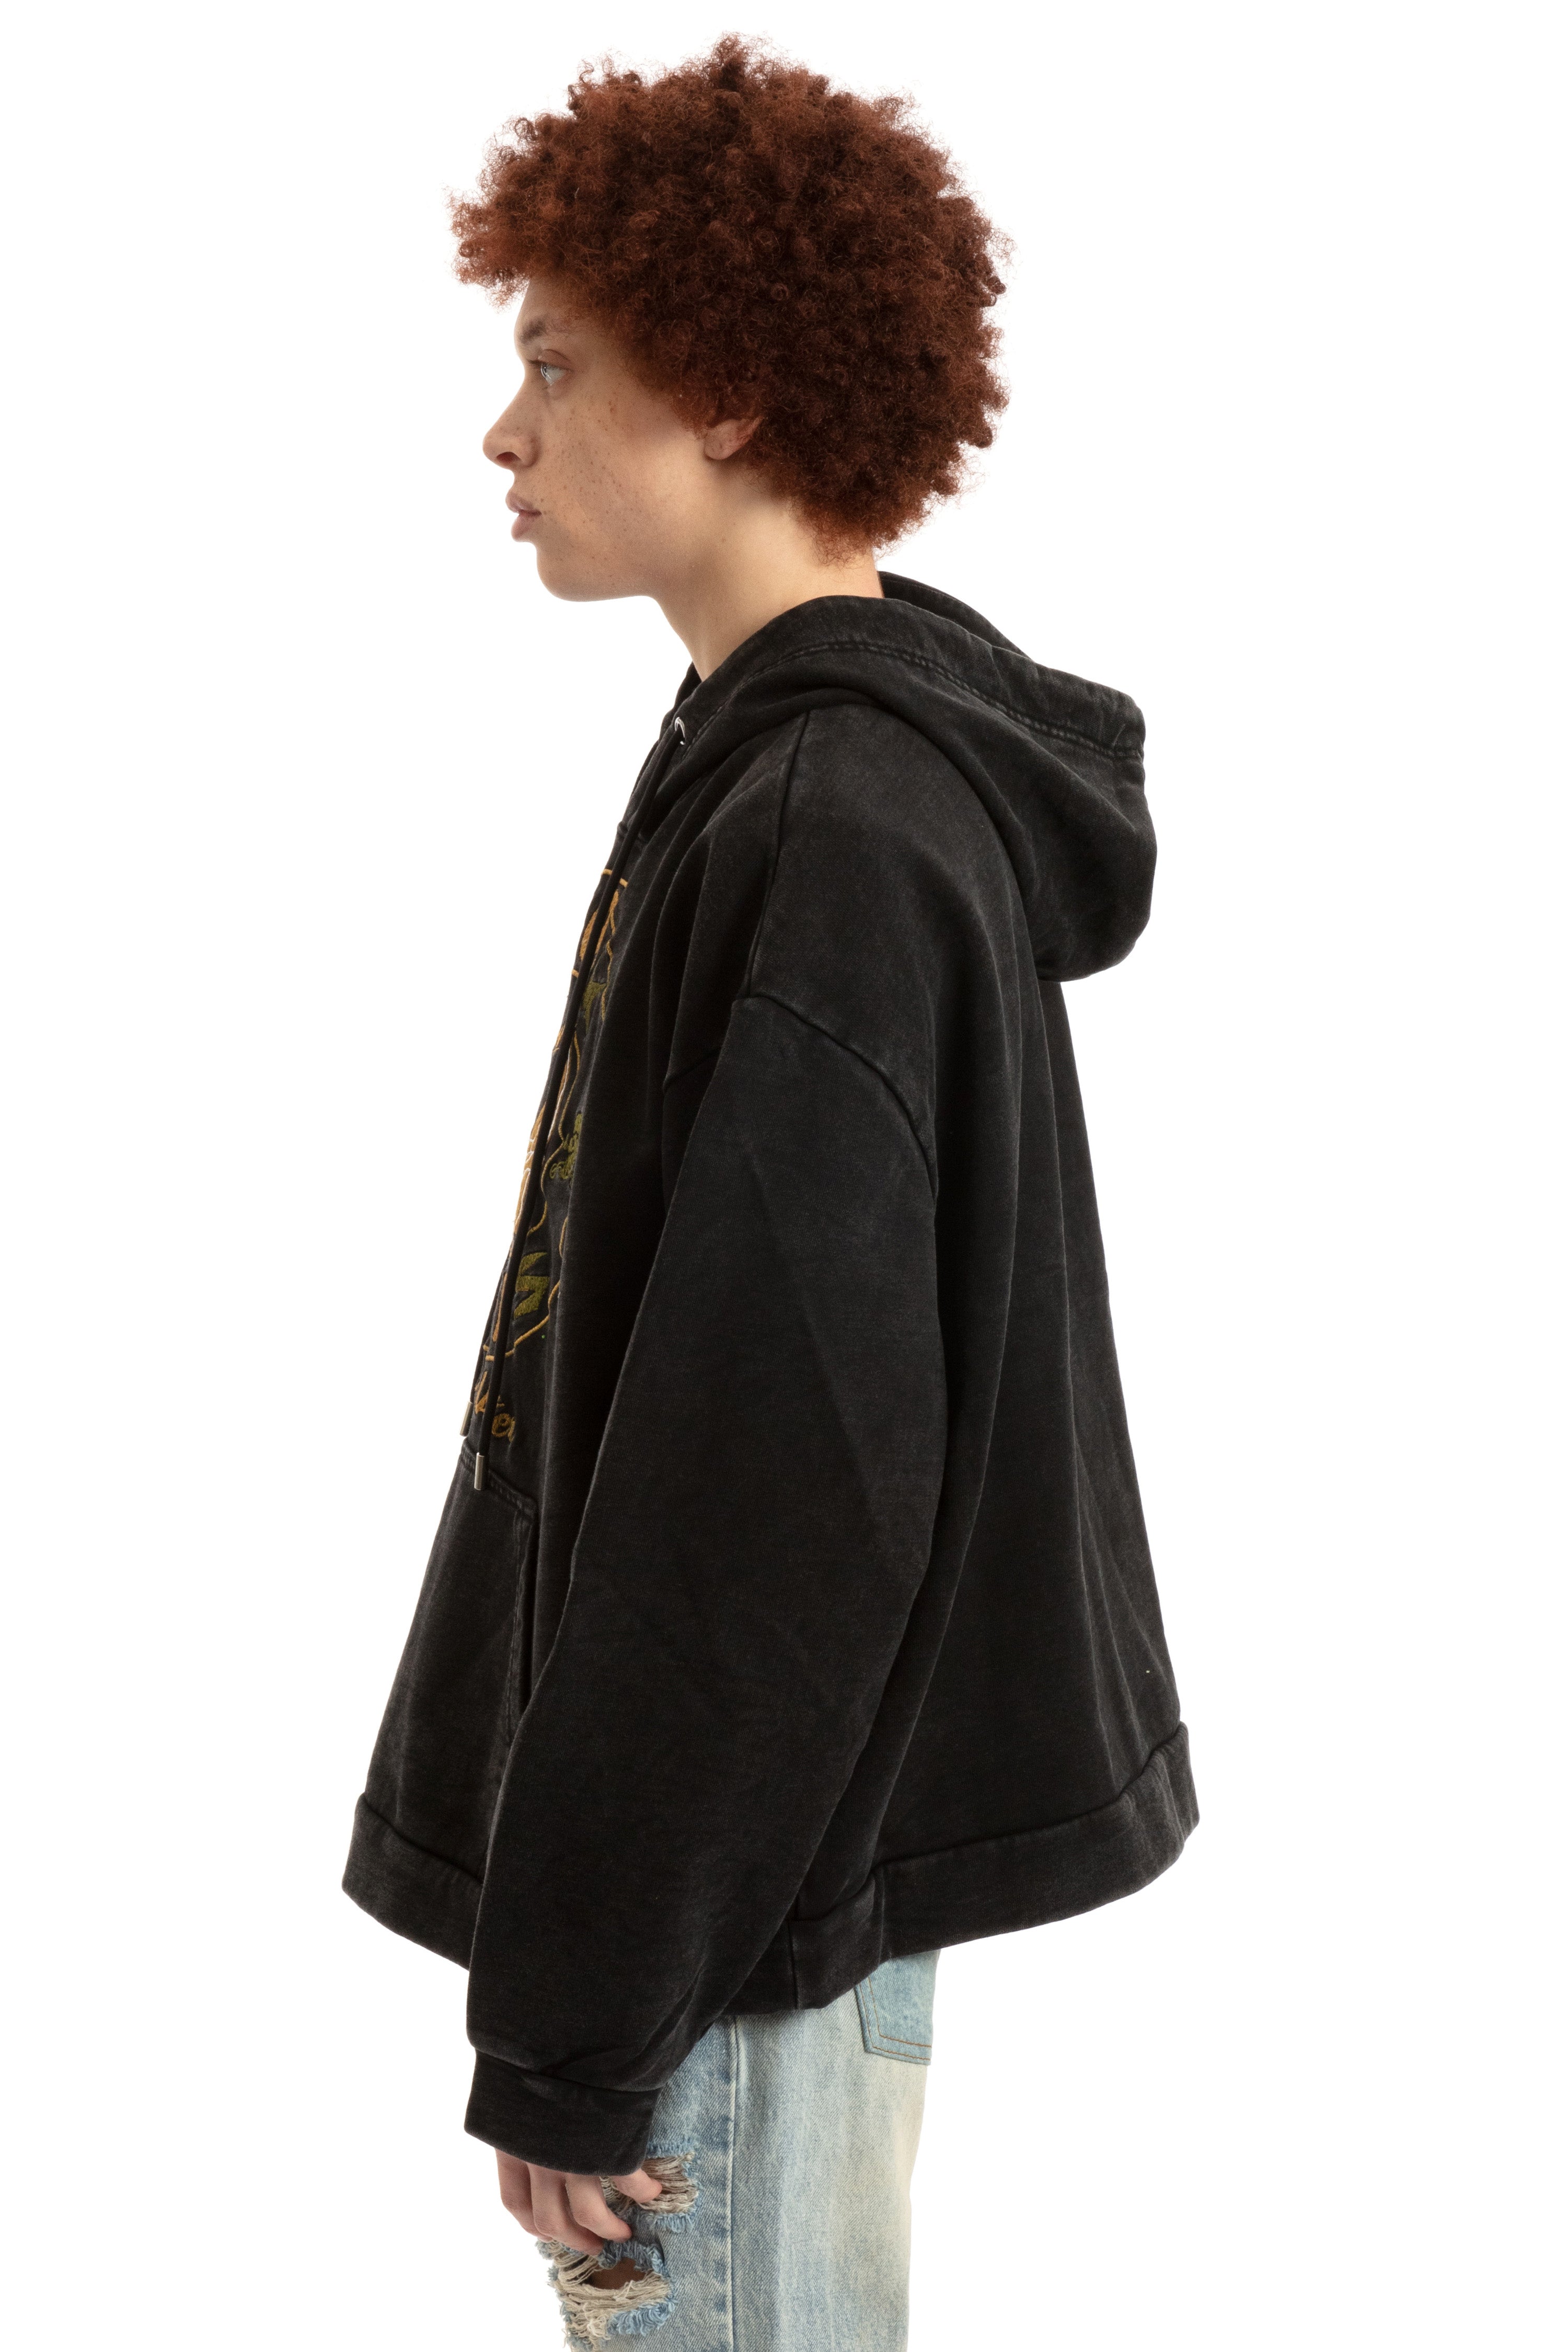 SHOCK WAVES HOODED PULLOVER